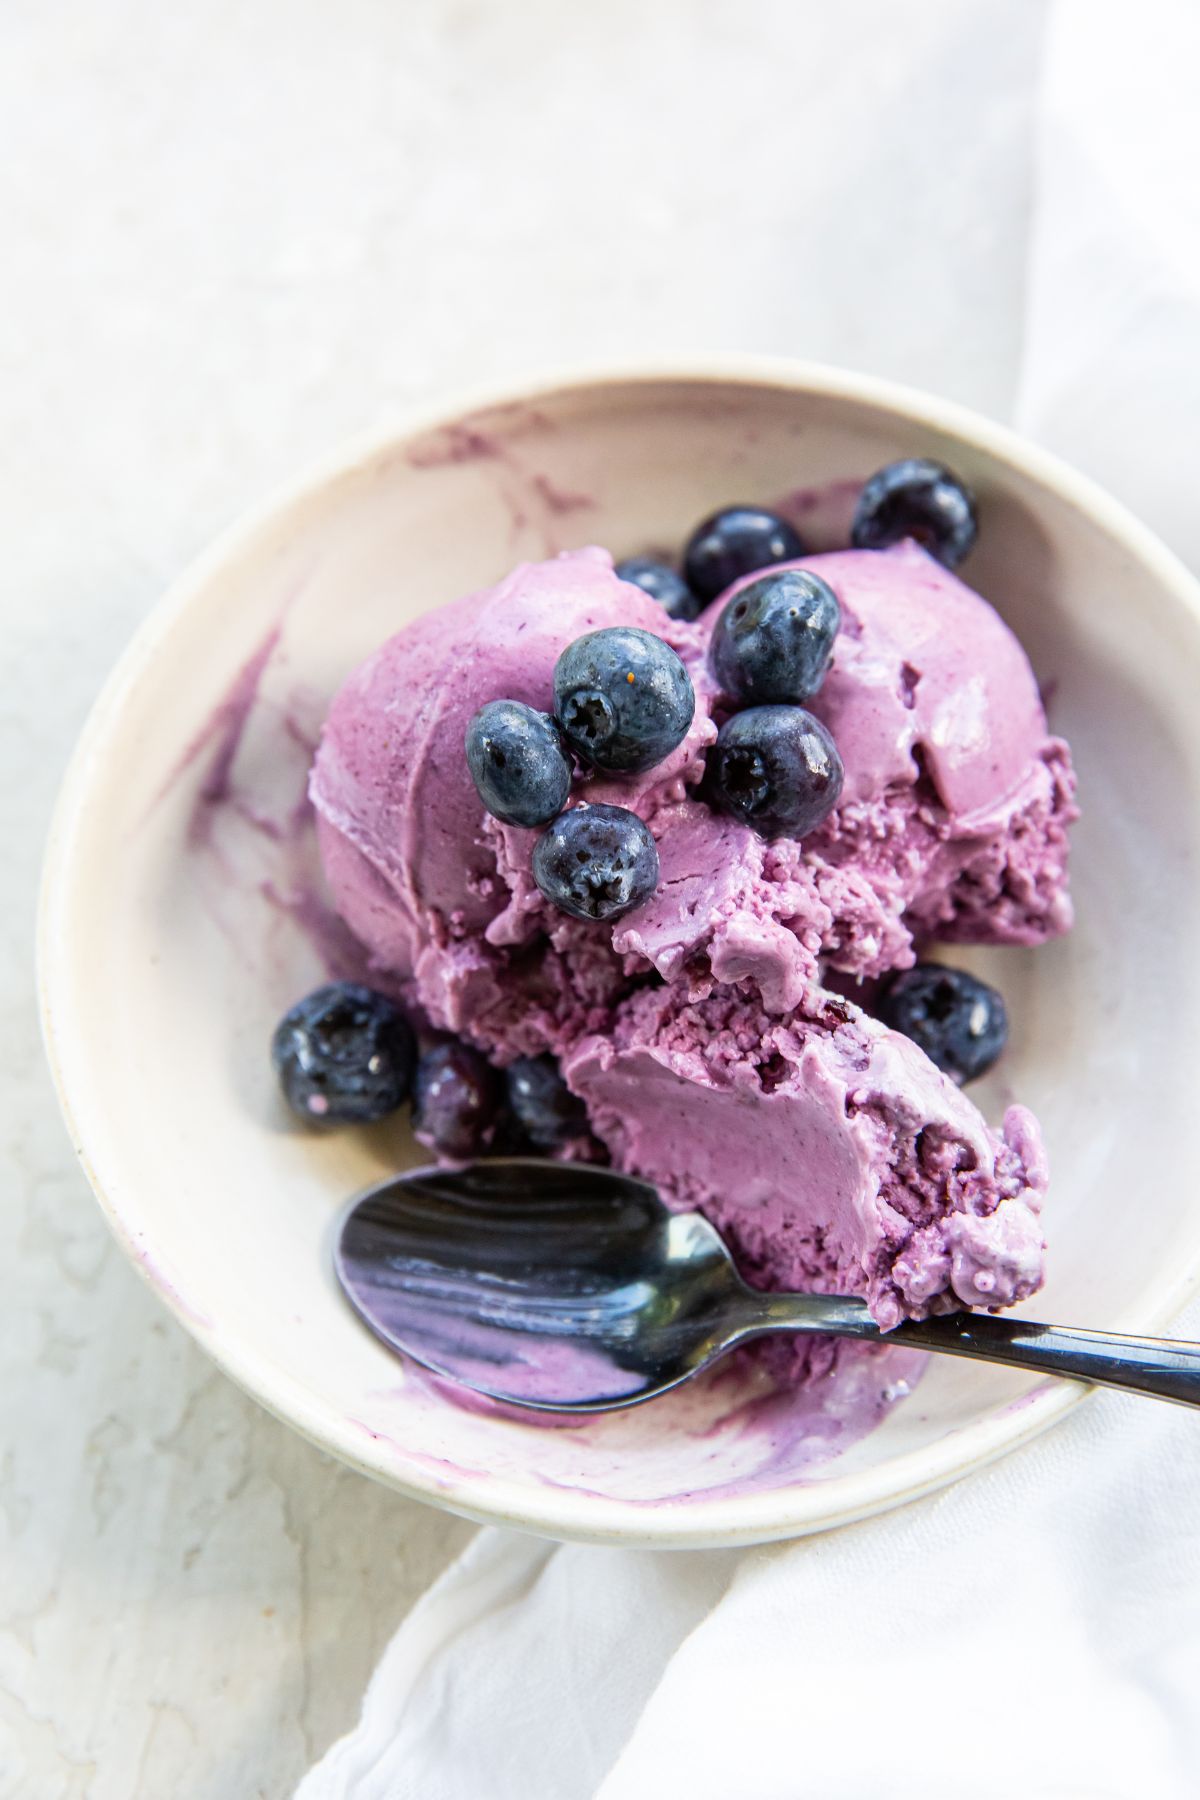 Blueberry cheesecake ice cream served in a bowl with a spoon.